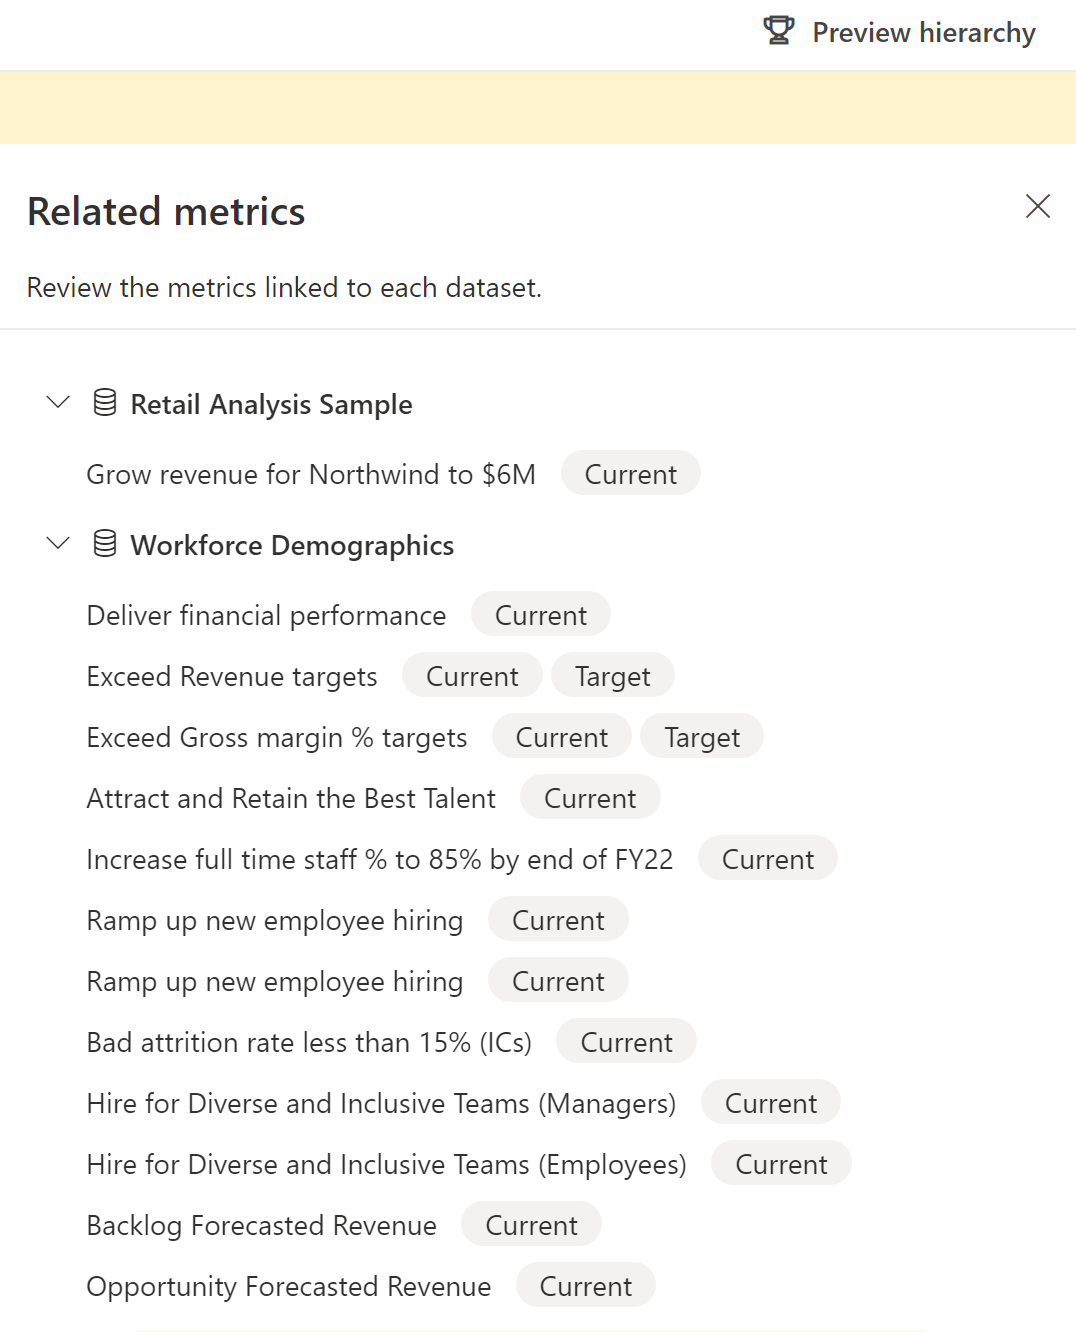 Screenshot of the hierarchy related metrics pane showing the connected metrics from the scorecard.